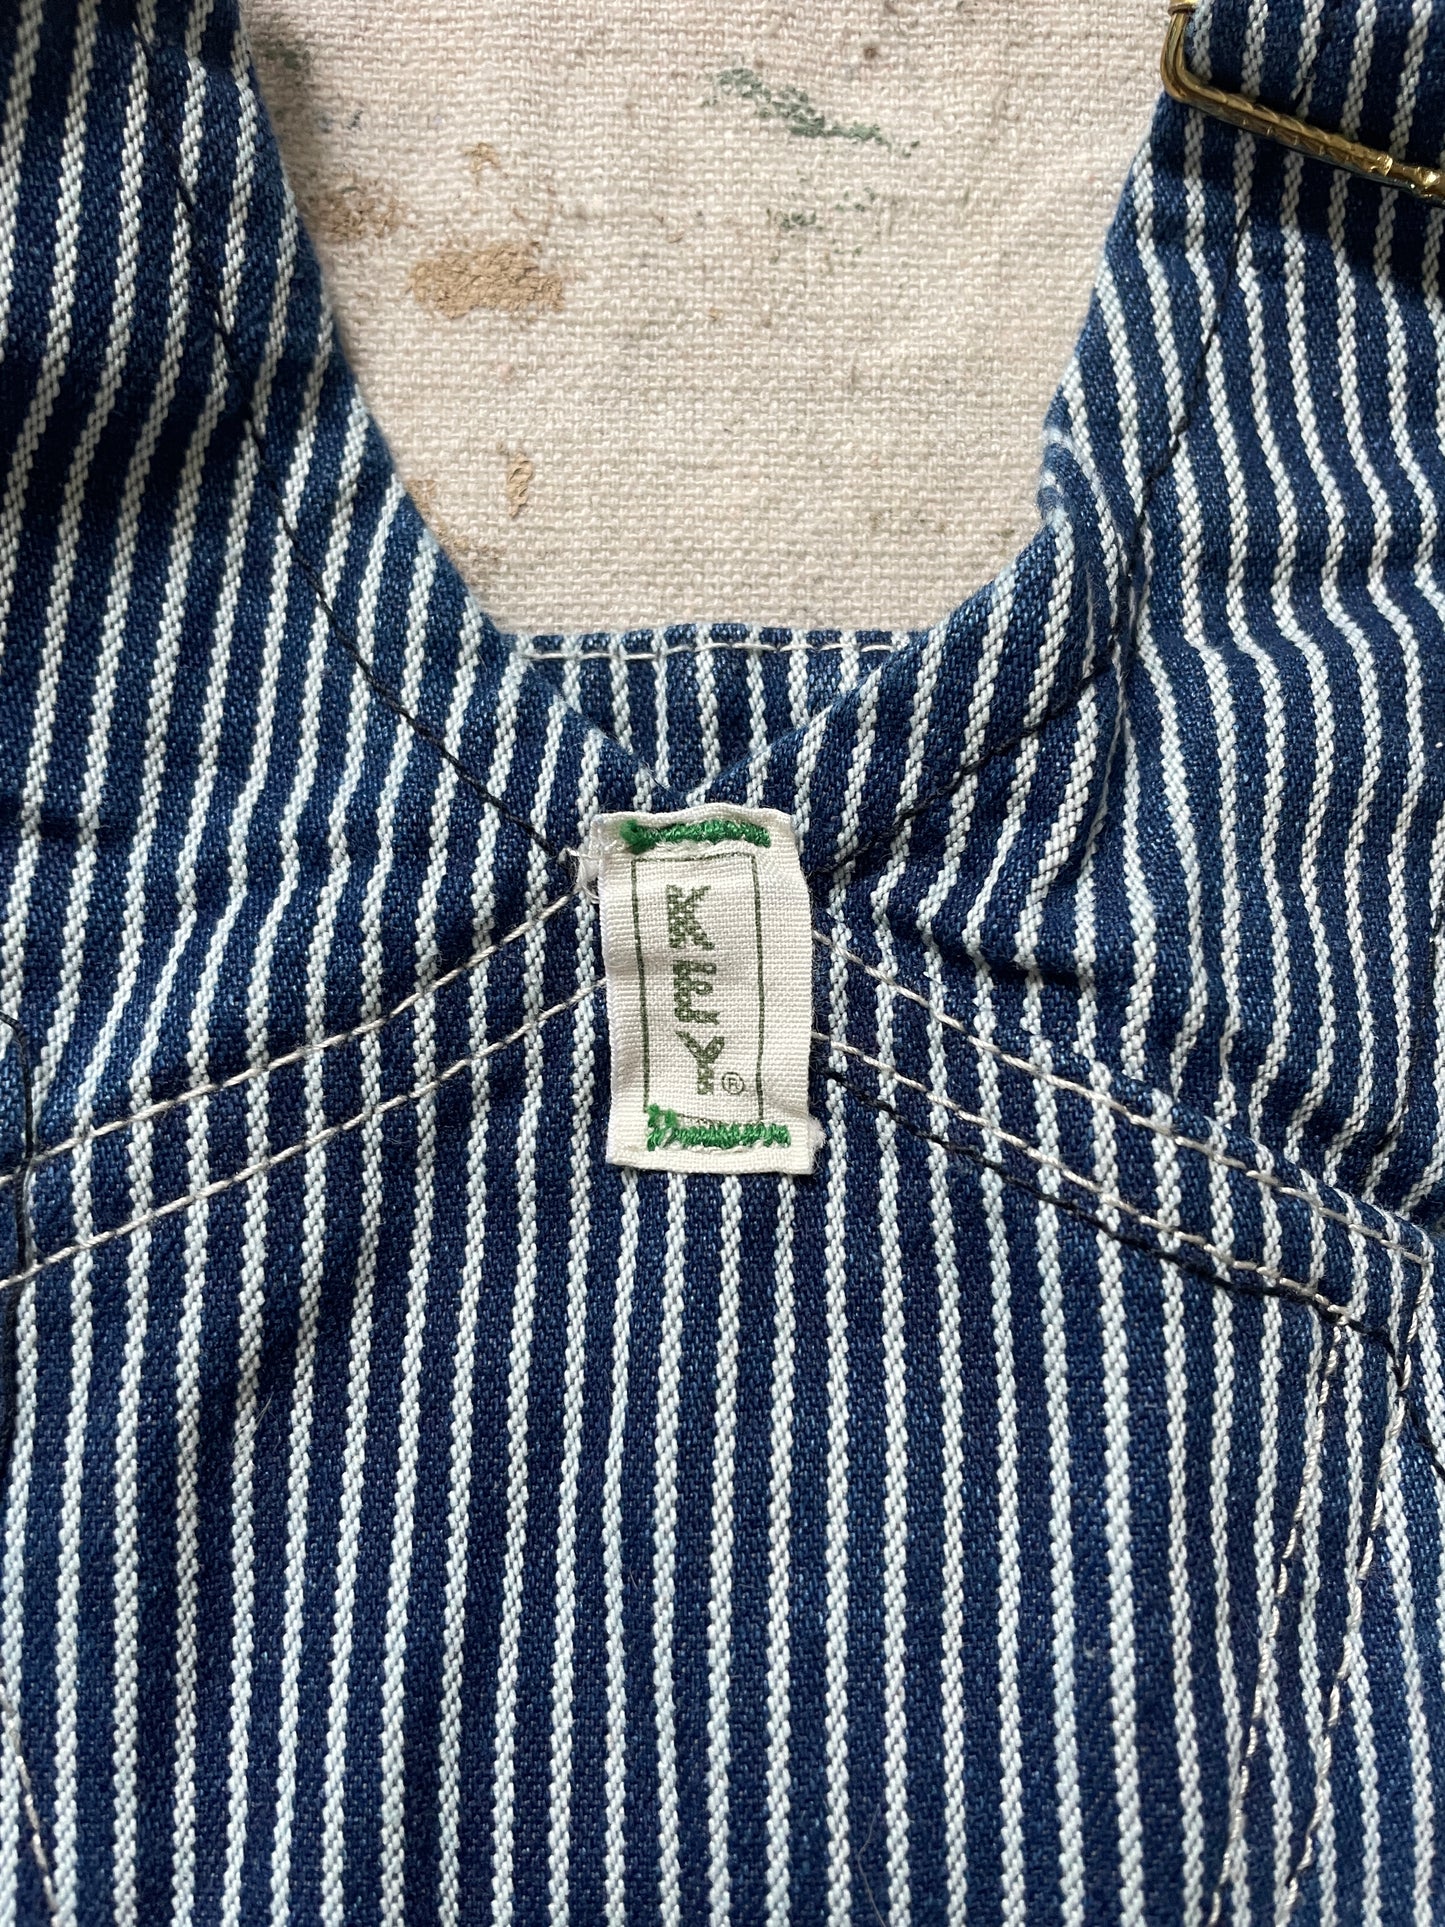 90s Key Imperial Hickory Stripe Overalls